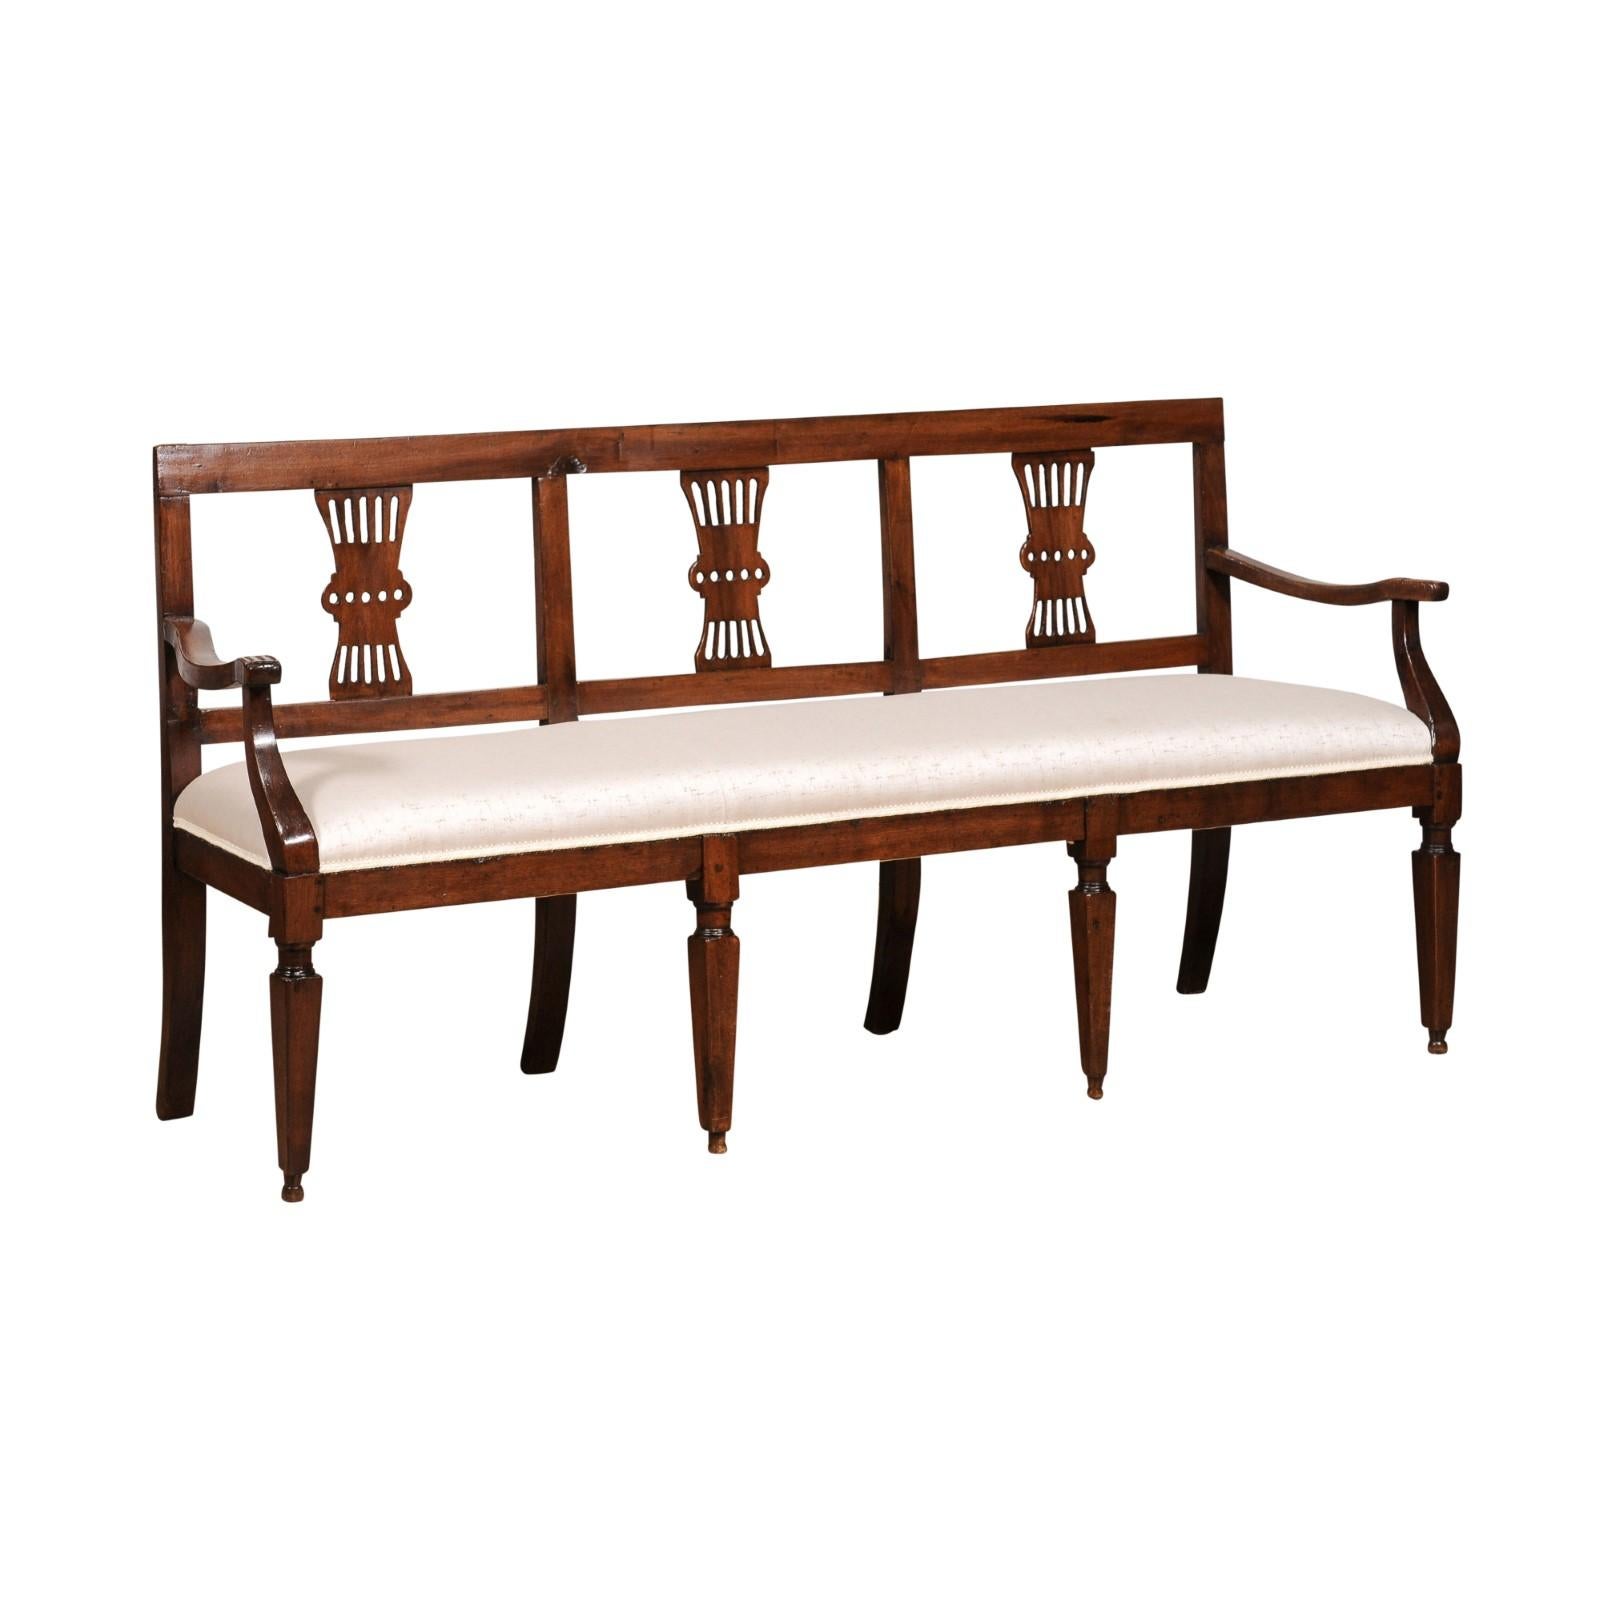 An  Italian walnut three-seater bench from the 19th century with carved splats, curving open arms, tapered legs in the front and saber ones in the back. Experience the timeless elegance of Italian craftsmanship with this captivating walnut